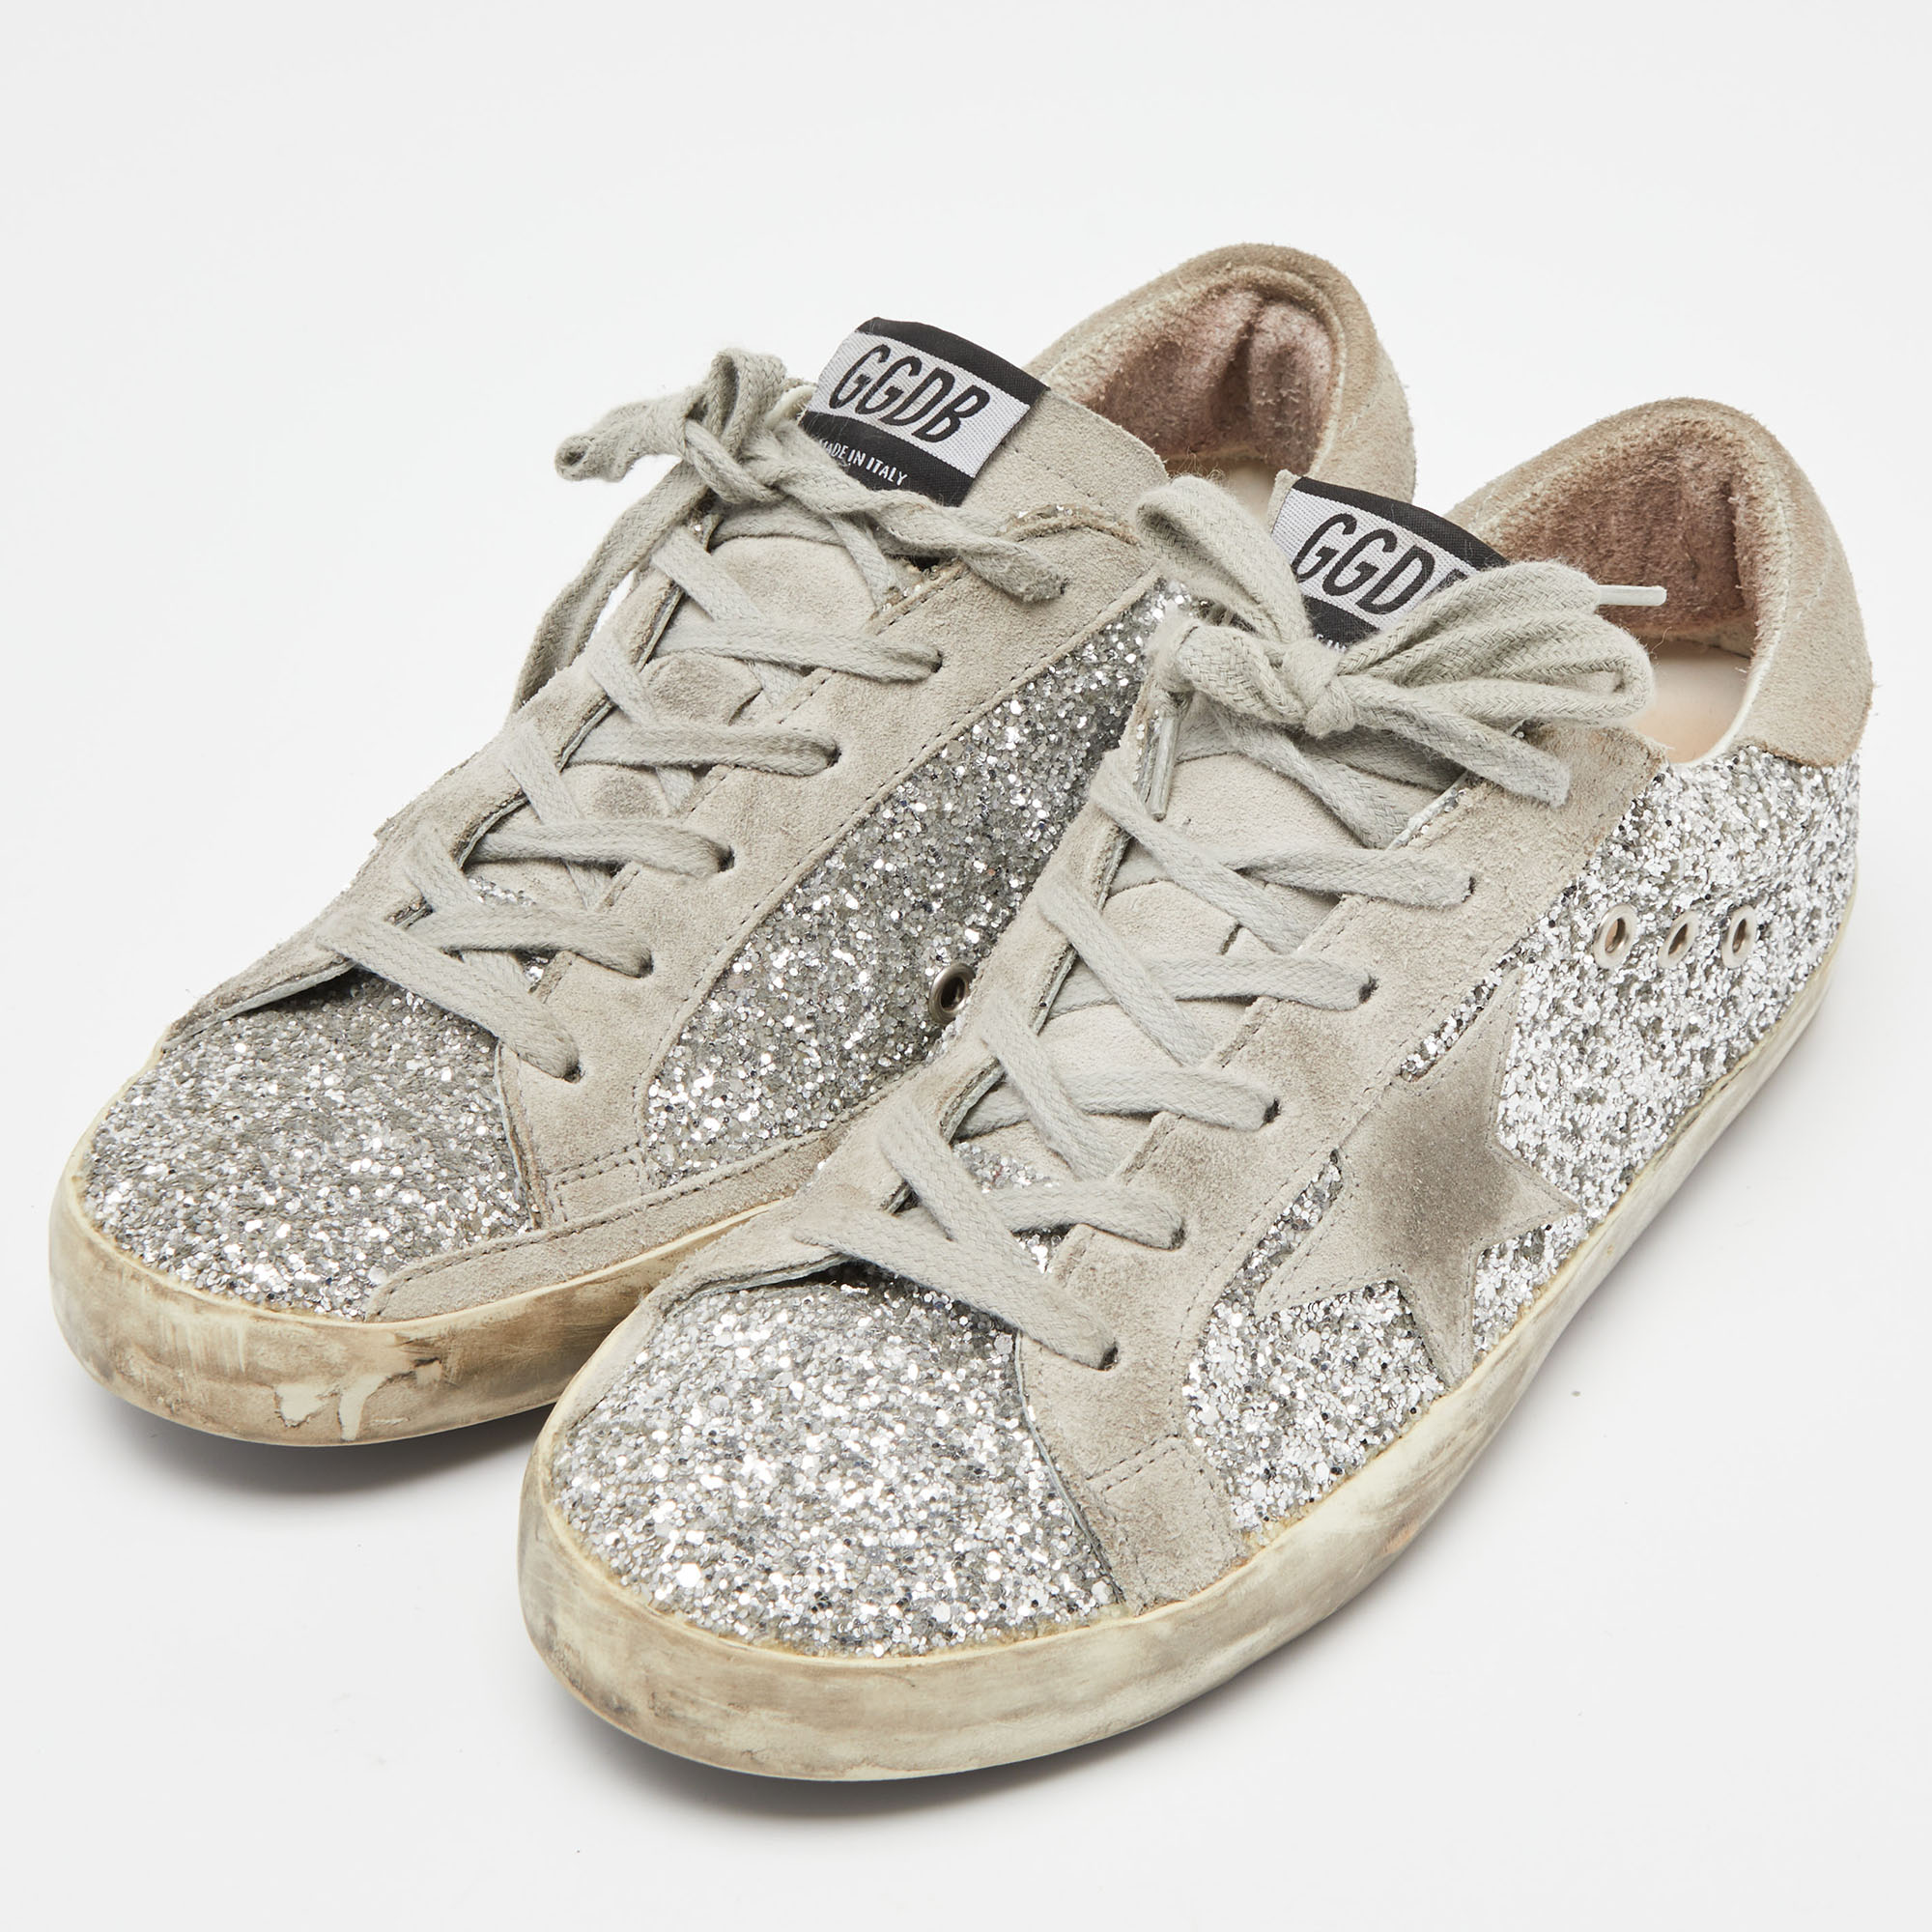 

Golden Goose Grey/Silver Suede and Glitter Superstar Sneakers Size